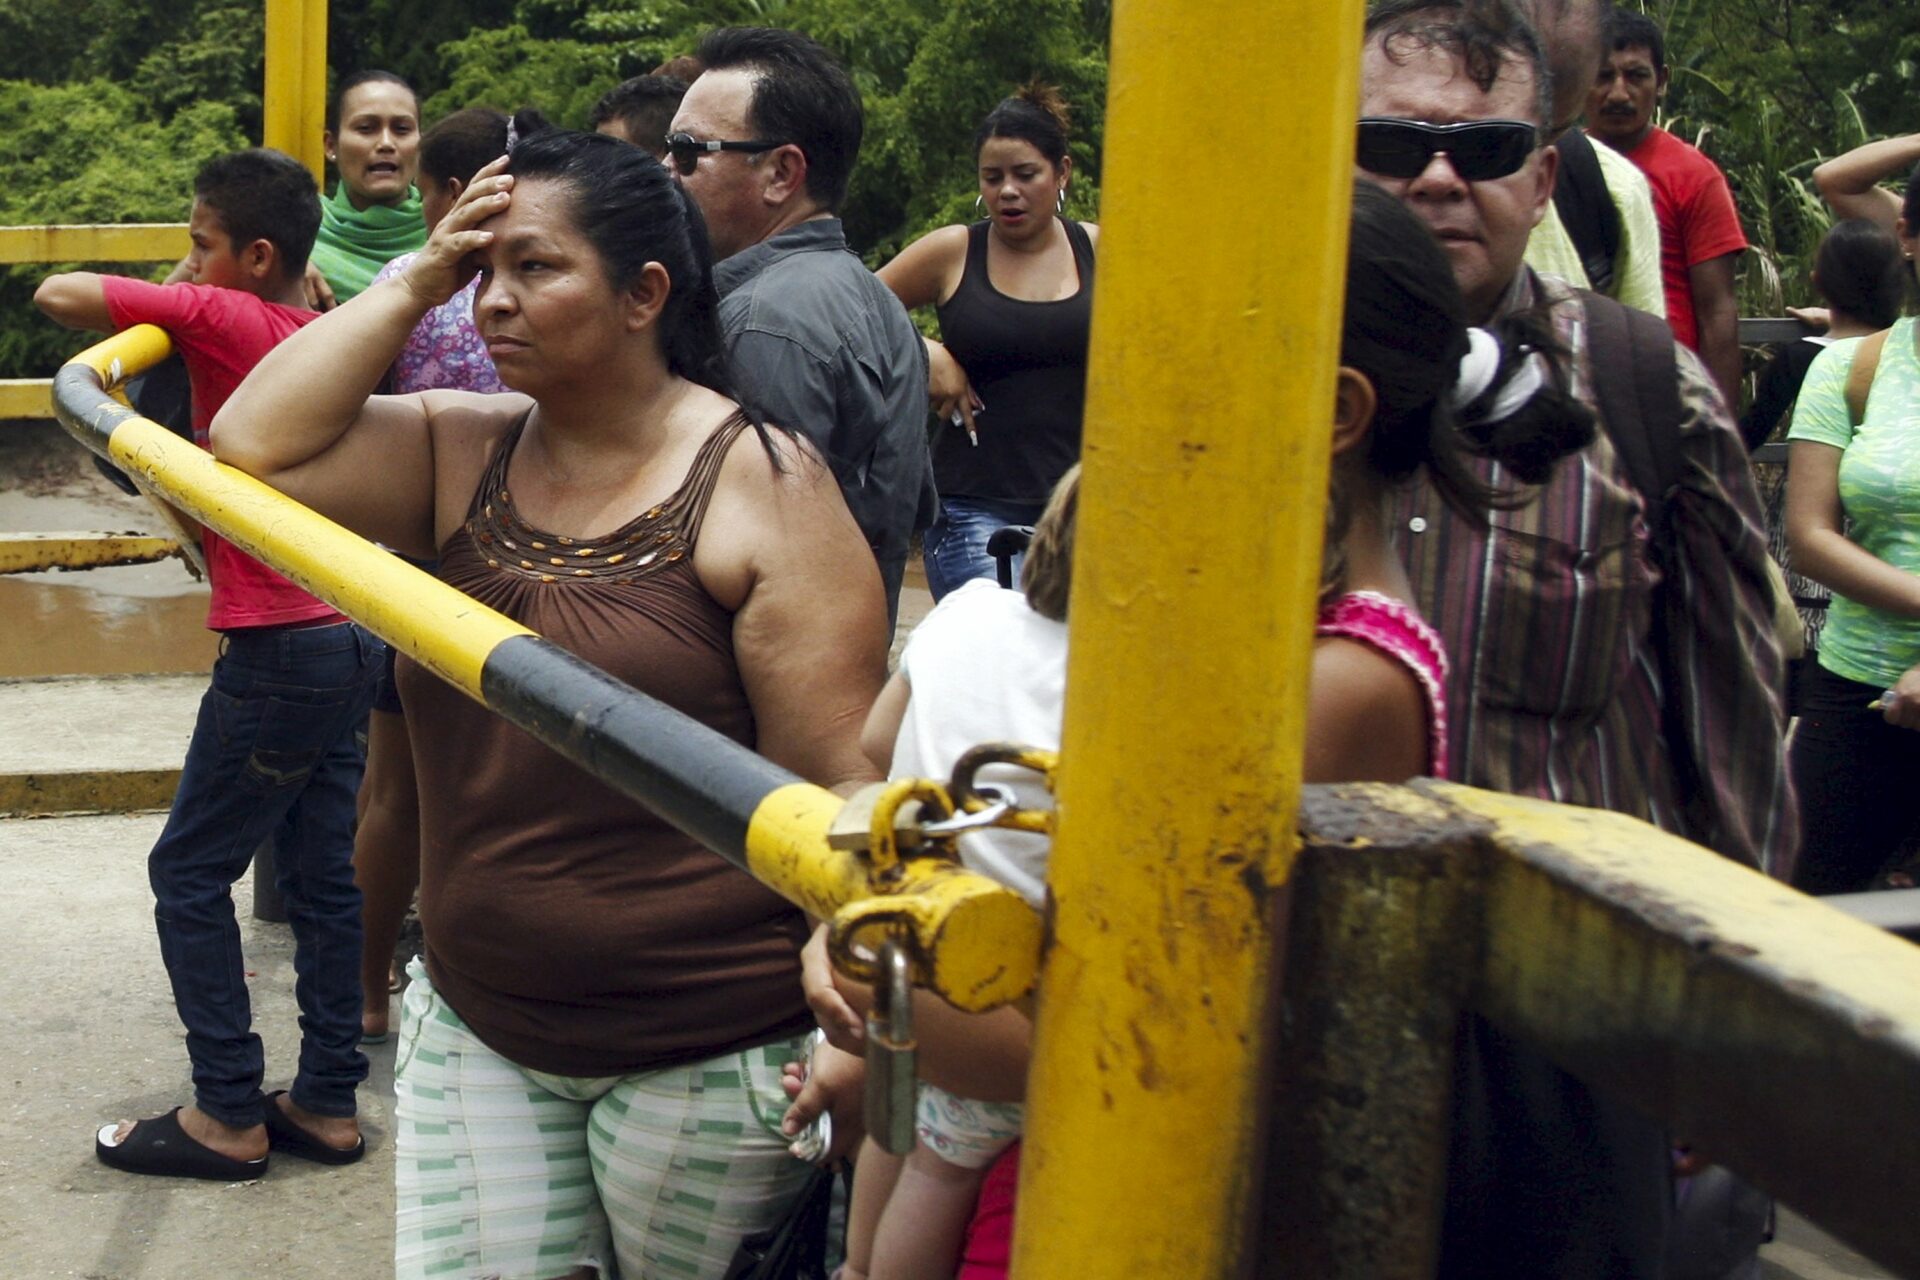 People stand next to a closed gate as they wait to try to cross La Union international bridge, on the border with Colombia at Boca de Grita in Tachira state, Venezuela August 29, 2015. Venezuela and Colombia each recalled their ambassadors to the other country on Thursday, amid a diplomatic crisis sparked when socialist-run Venezuela closed two border crossings and deported over a thousand Colombians. Venezuelan President Nicolas Maduro shut the crossings last week after a shootout between smugglers and troops wounded three soldiers. He later extended the closing indefinitely and has characterized the deportations as a crackdown on paramilitary gangs. REUTERS/Carlos Eduardo Ramirez